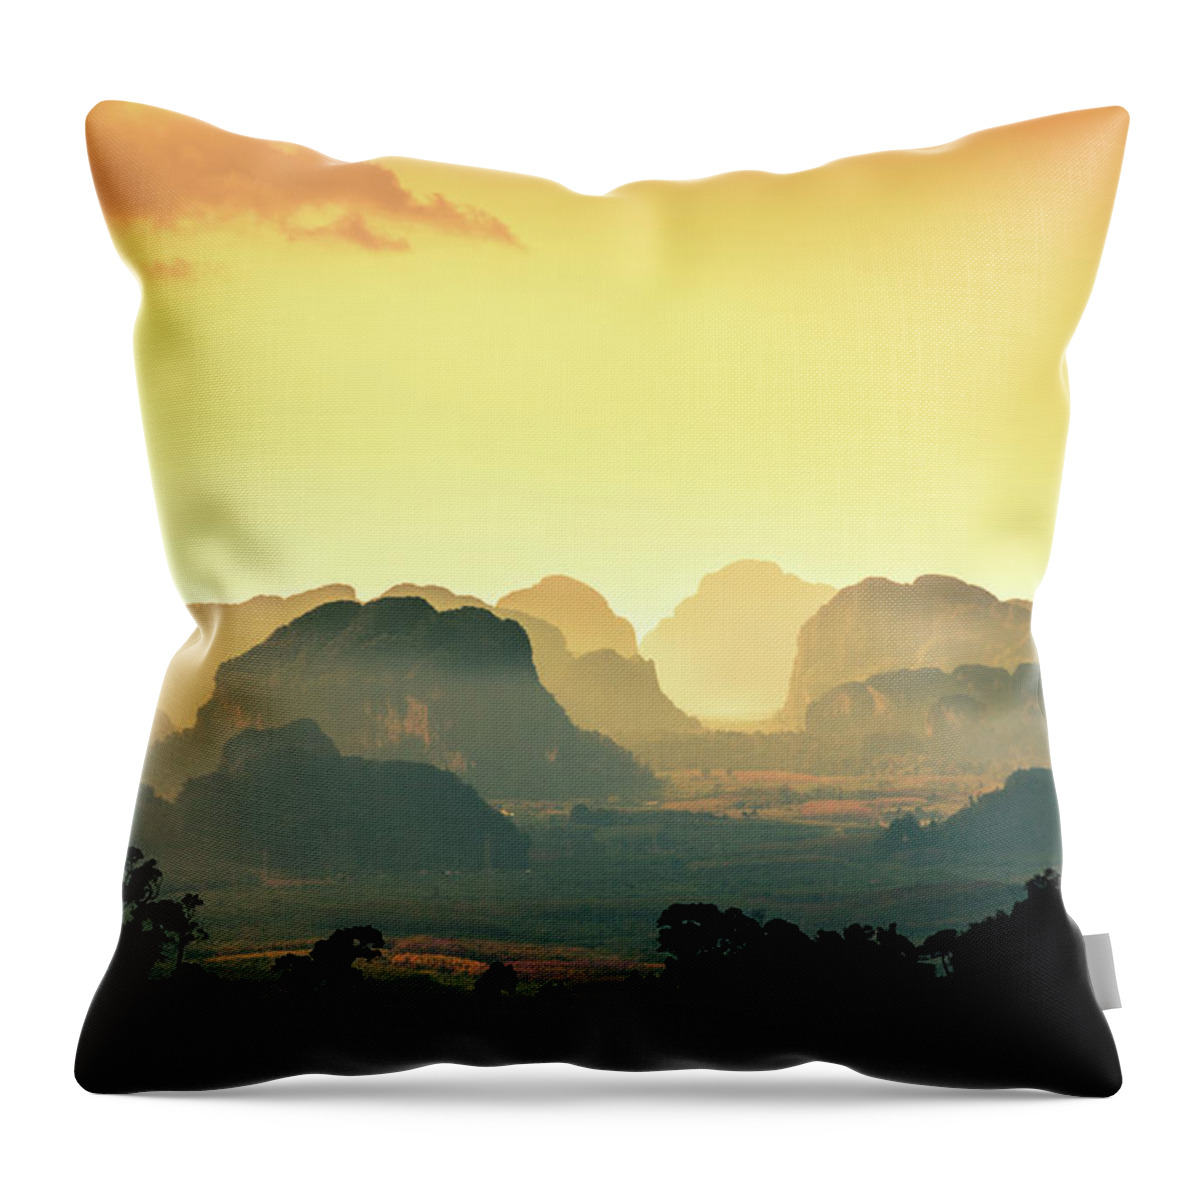 Tropical Rainforest Throw Pillow featuring the photograph Tropical Forest Landscape In Thailand by Lightkey